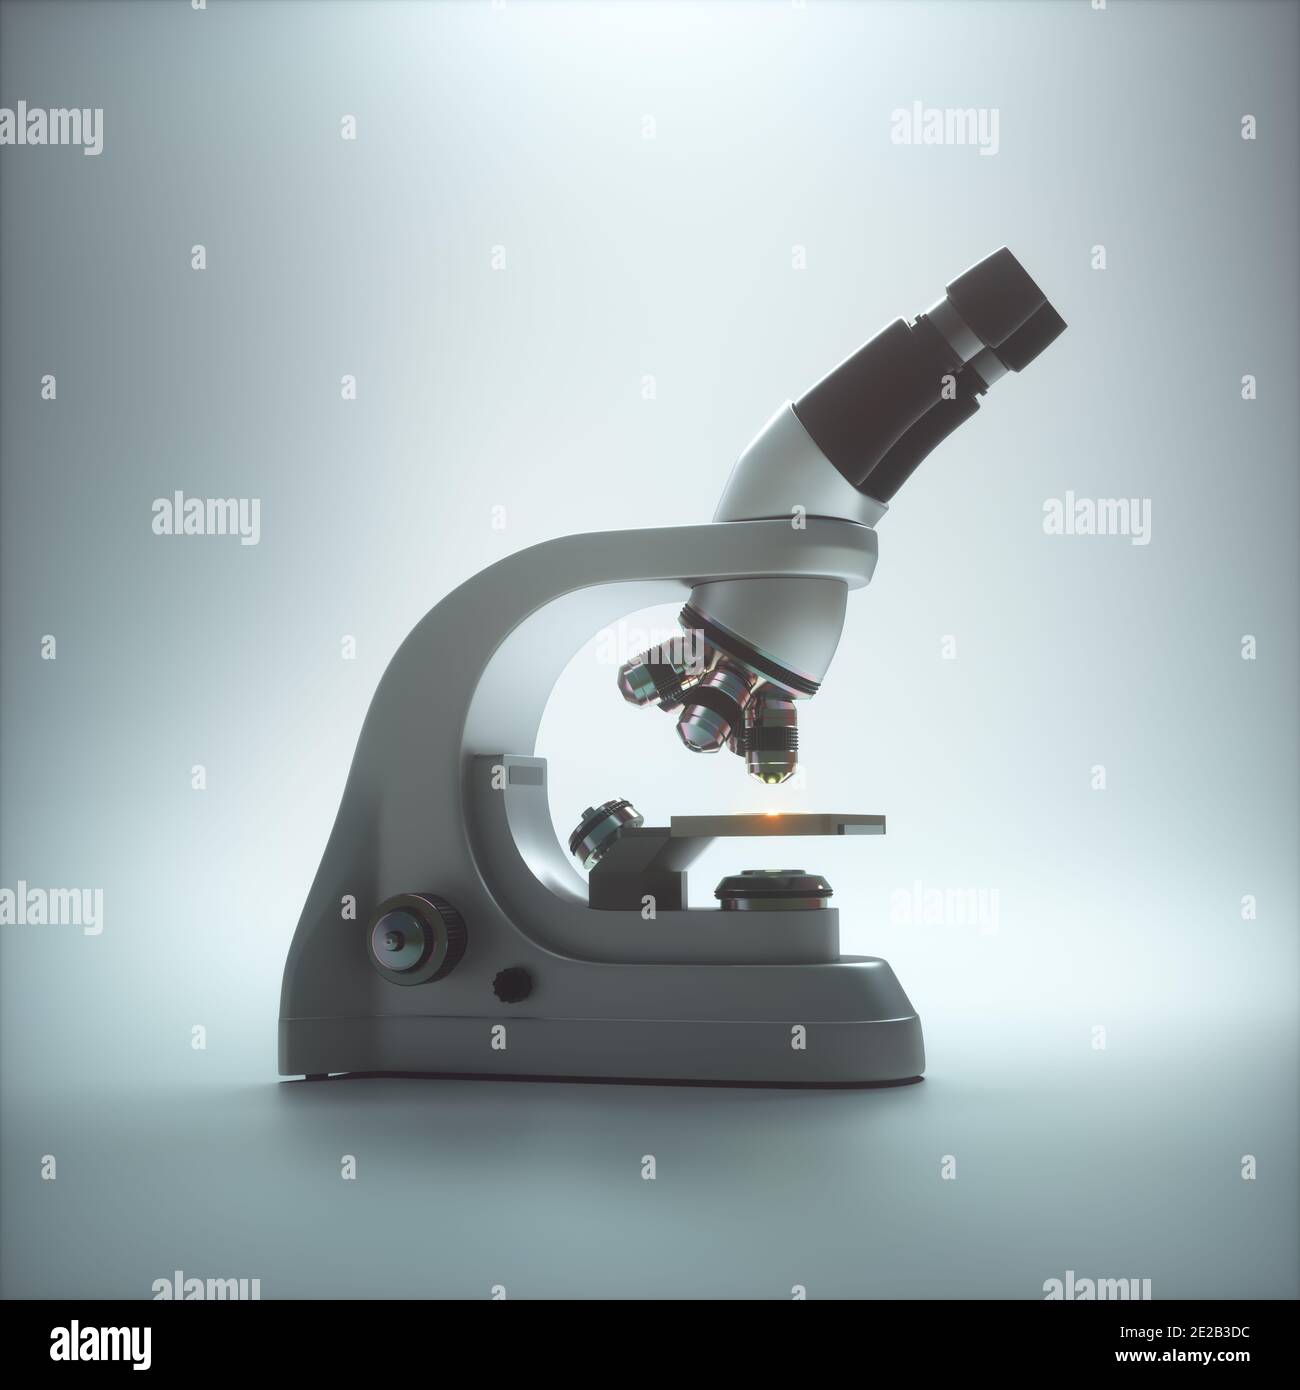 Optical electron microscope. Laboratory instrument with clipping path included. Stock Photo